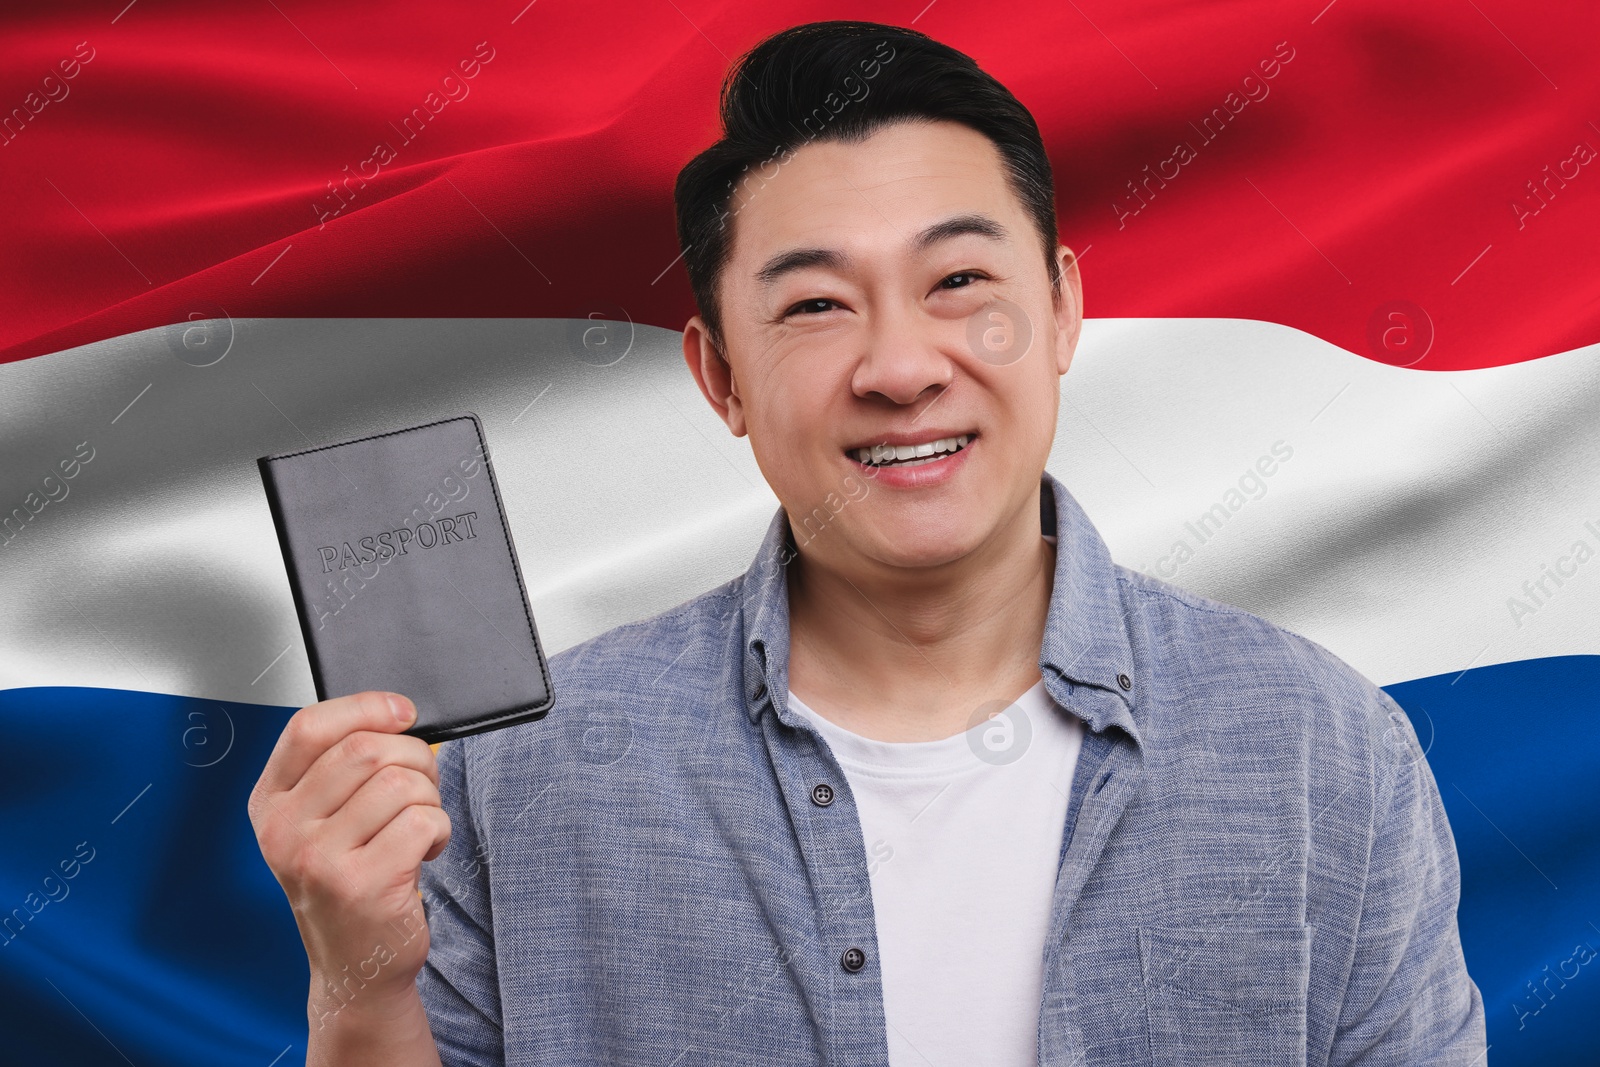 Image of Immigration. Happy man with passport against national flag of Netherlands